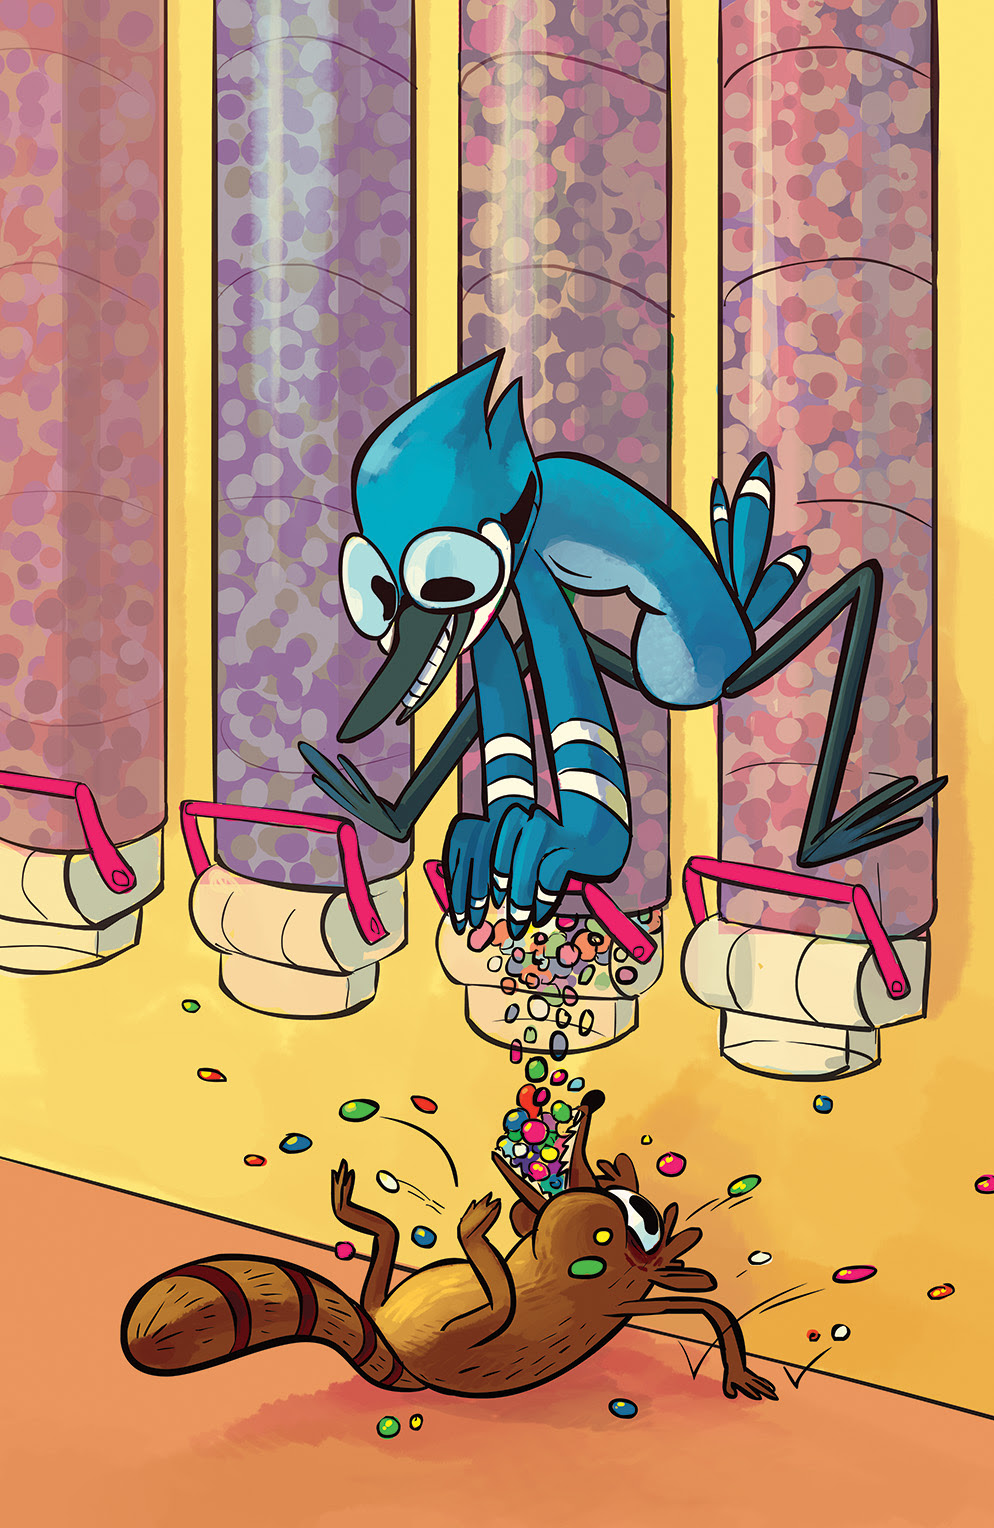 REGULAR SHOW #14 Cover B by Chelsea McAlarney